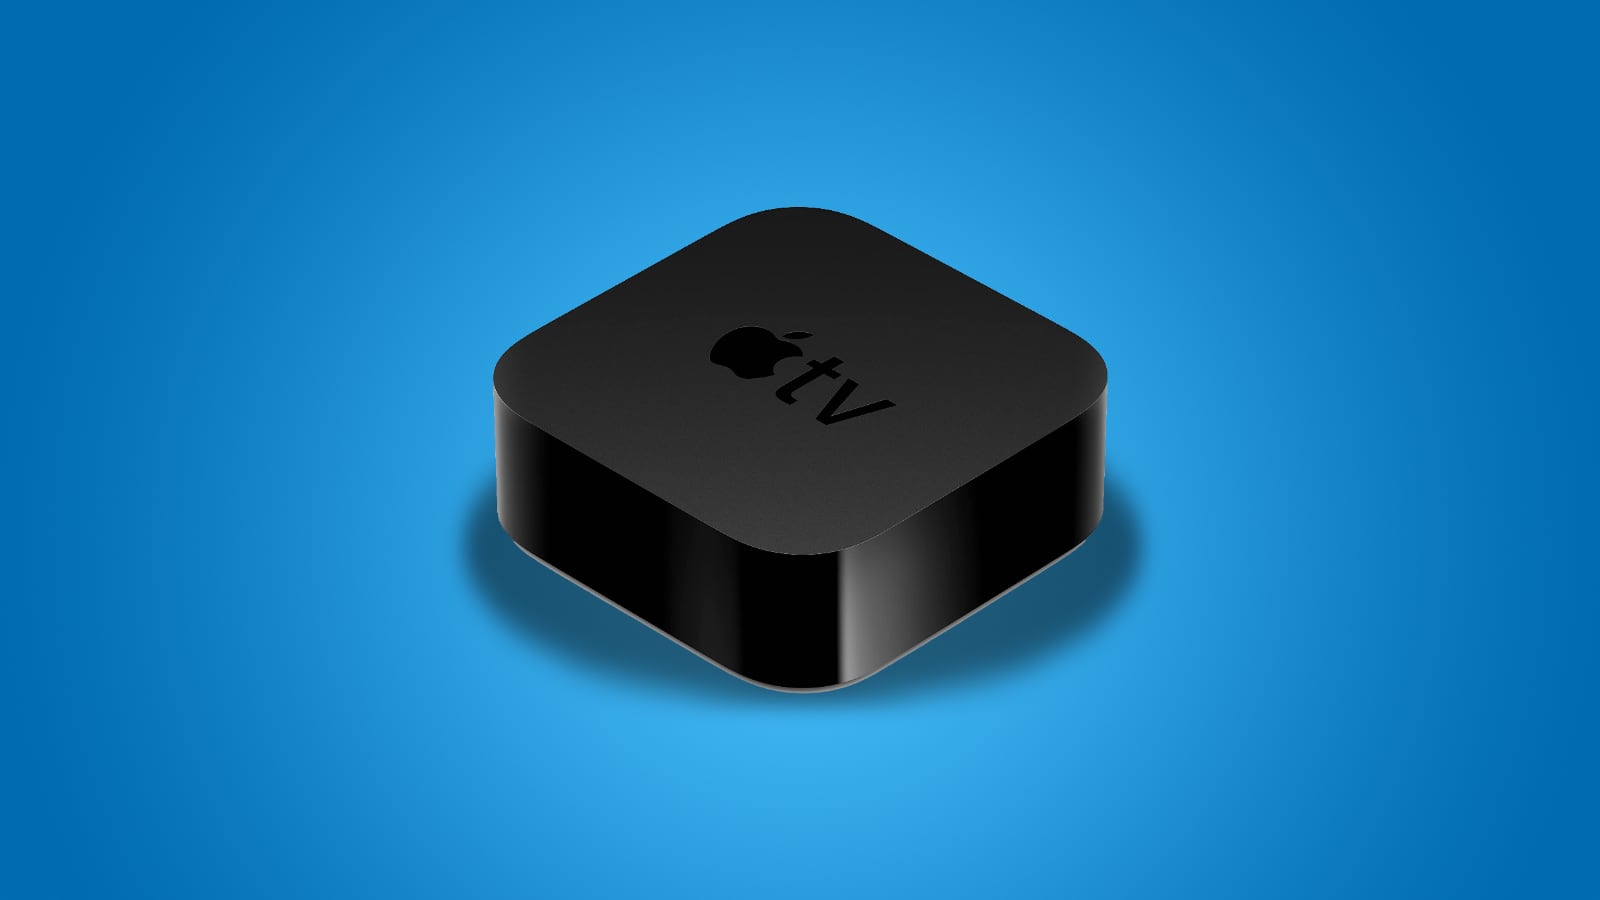 A future Apple TV 8K would be in preparation after the beta of iOS 16